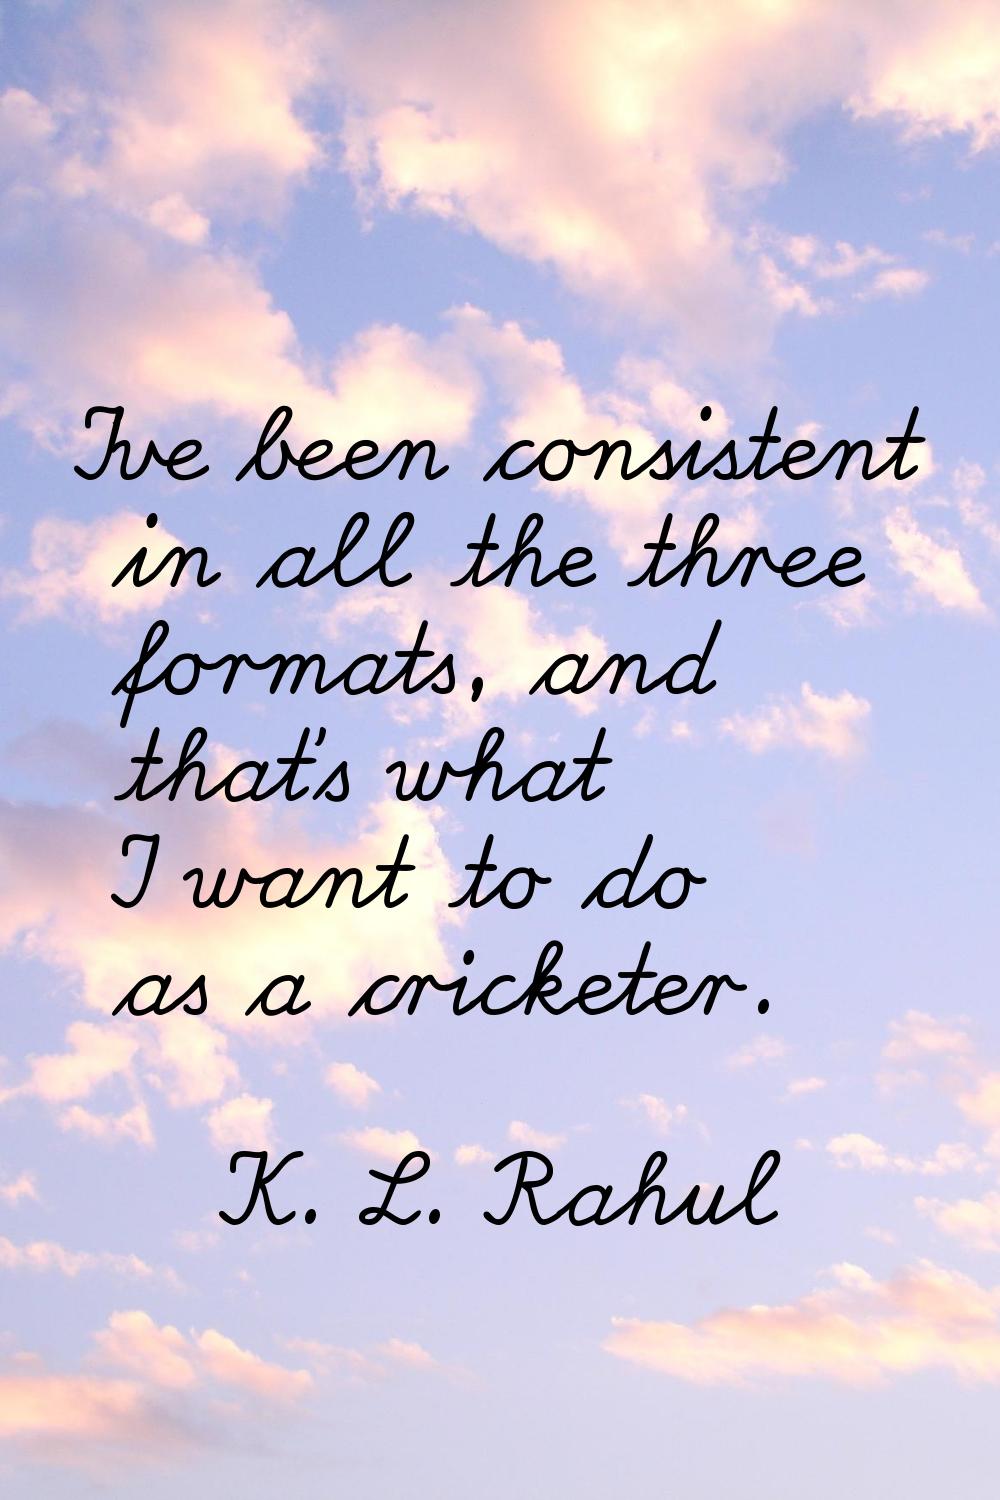 I've been consistent in all the three formats, and that's what I want to do as a cricketer.